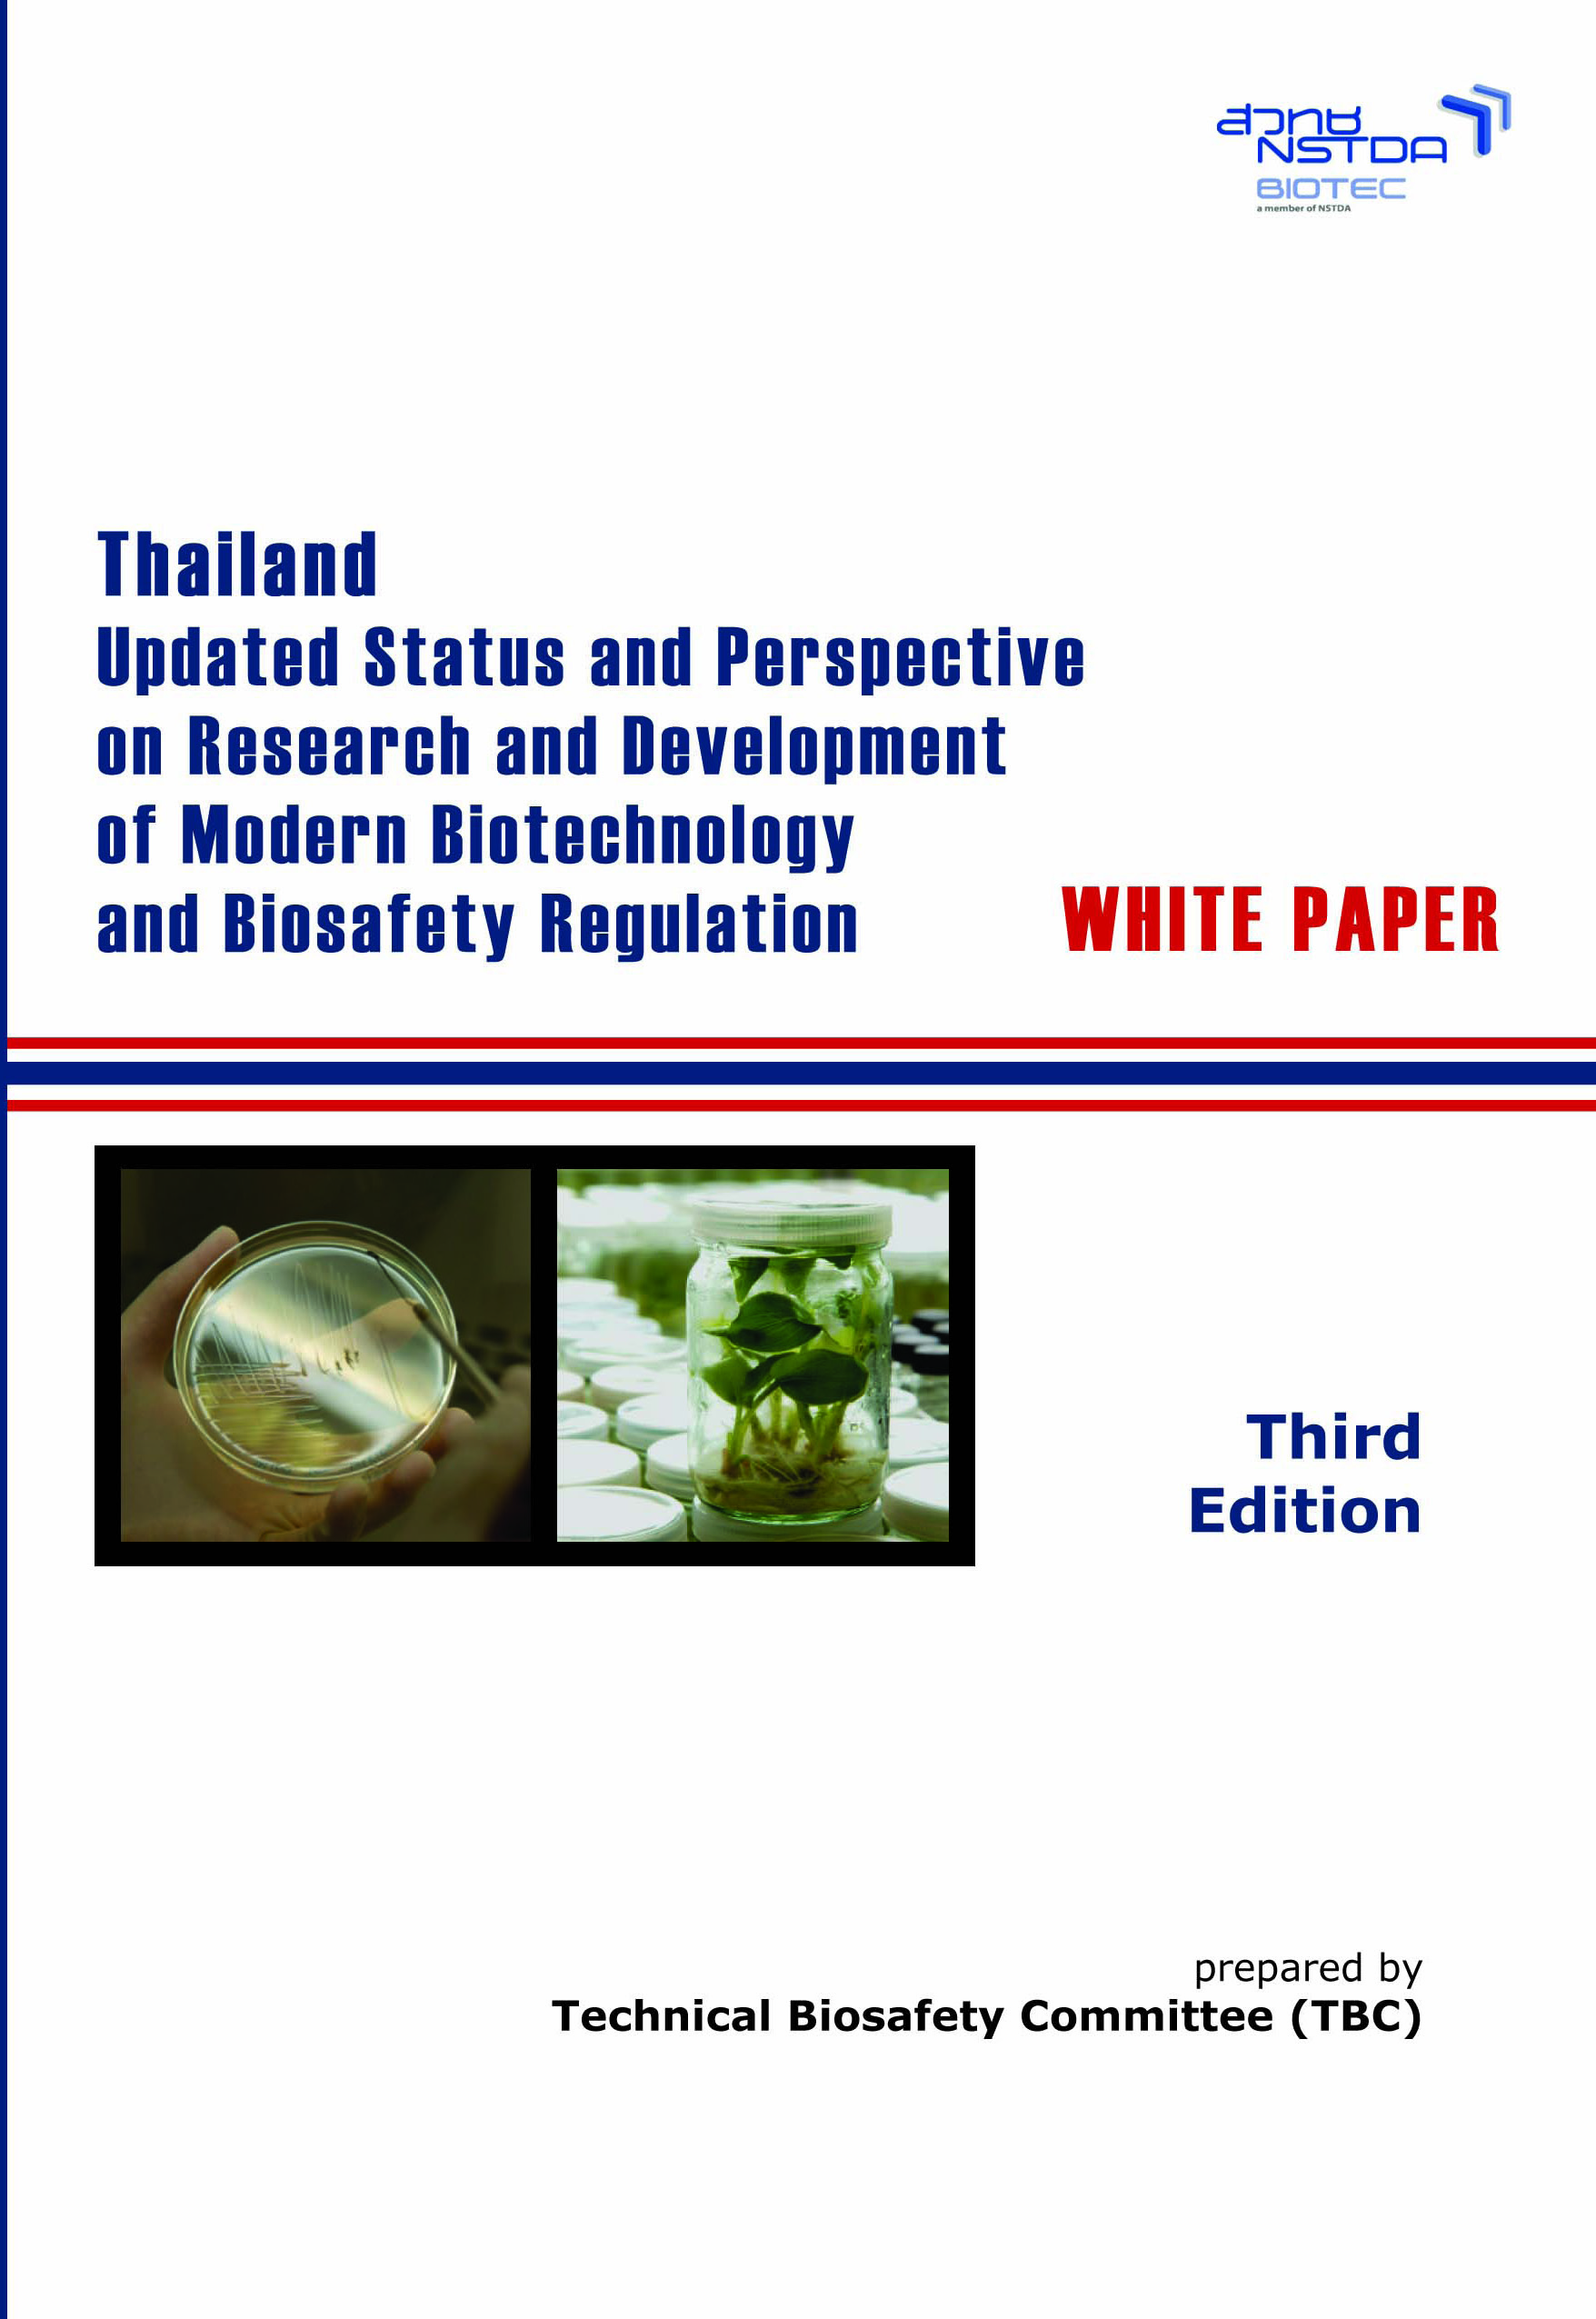 white paper 3rd edition